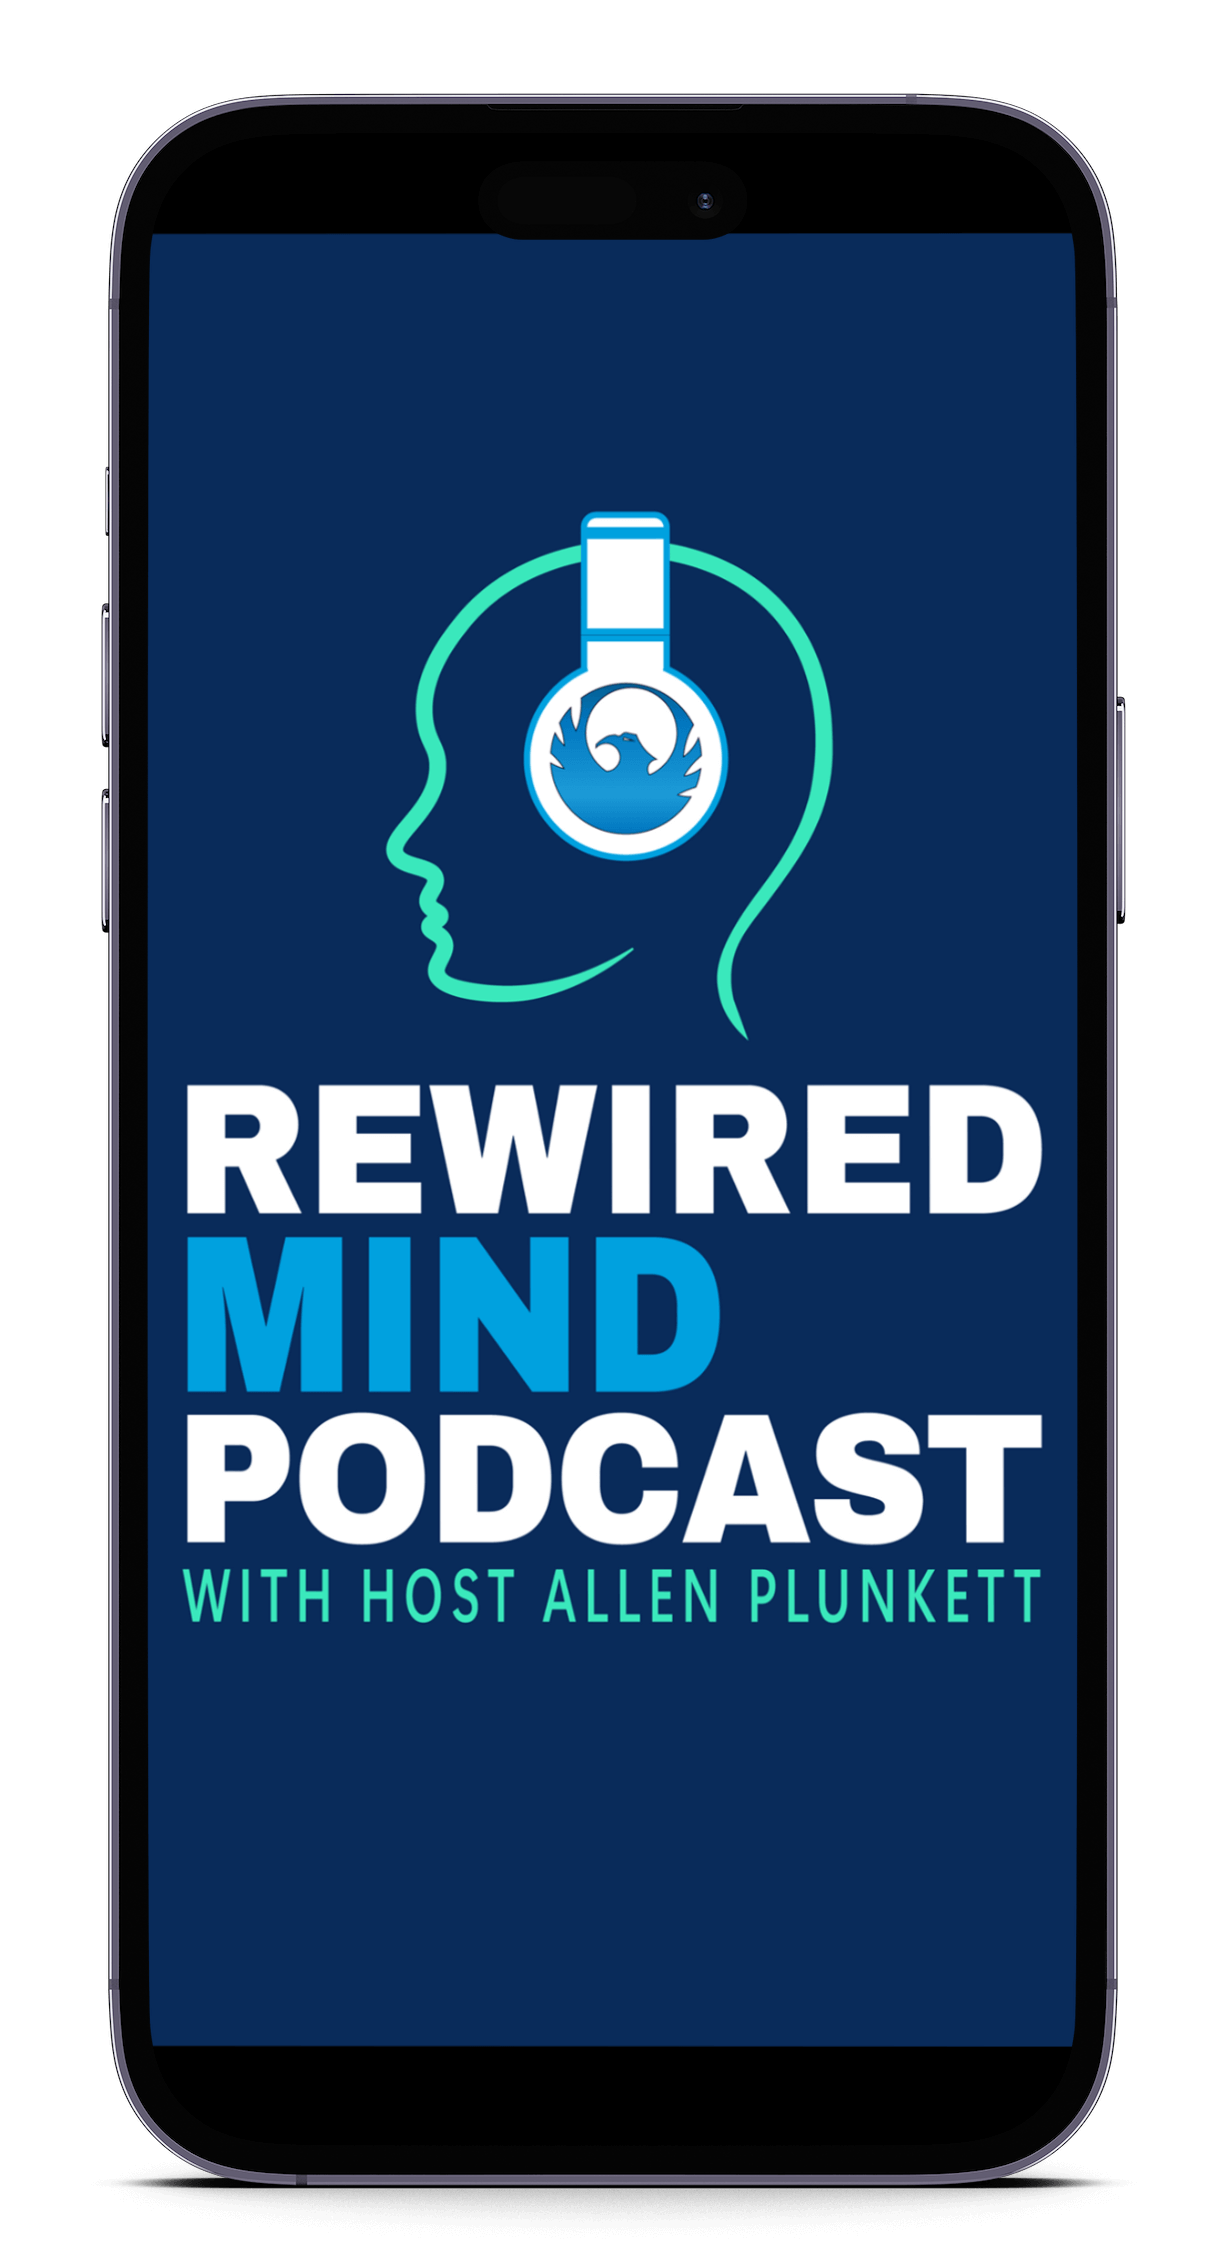 Rewired Mind podcast logo on an iphone.